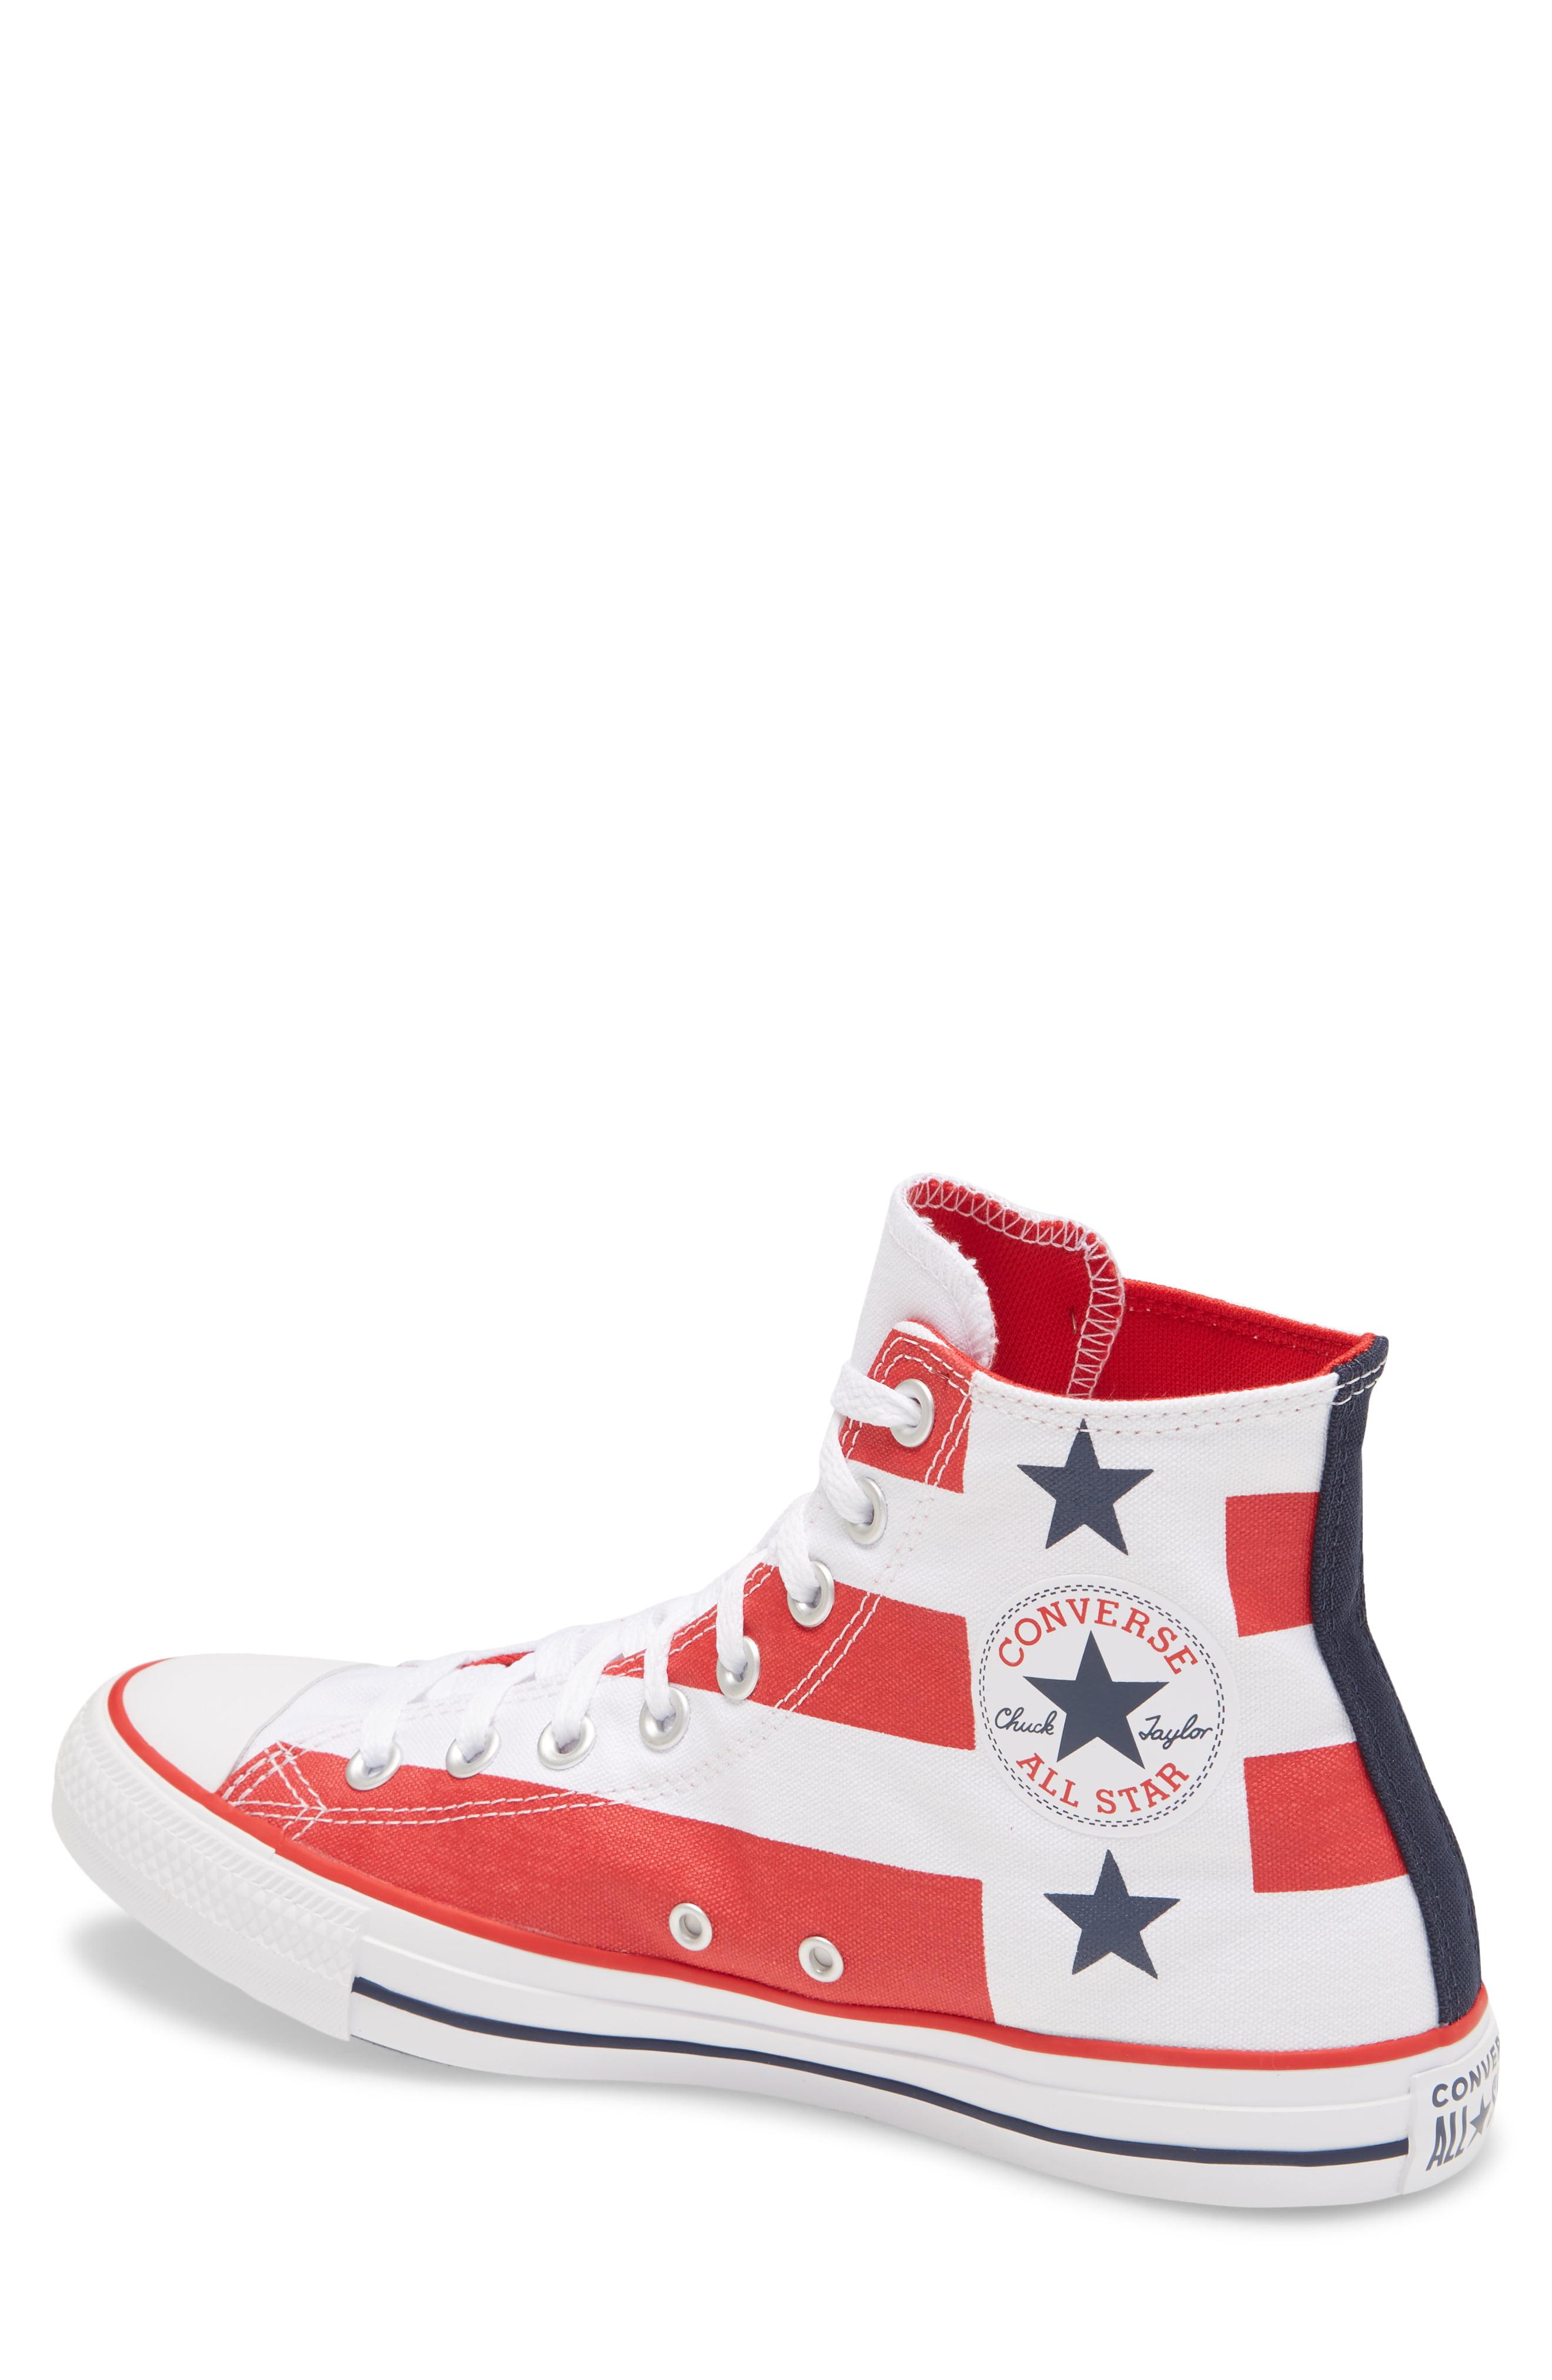 Converse Chuck Taylor All Star Stars & Stripes High Top Sneaker in ...